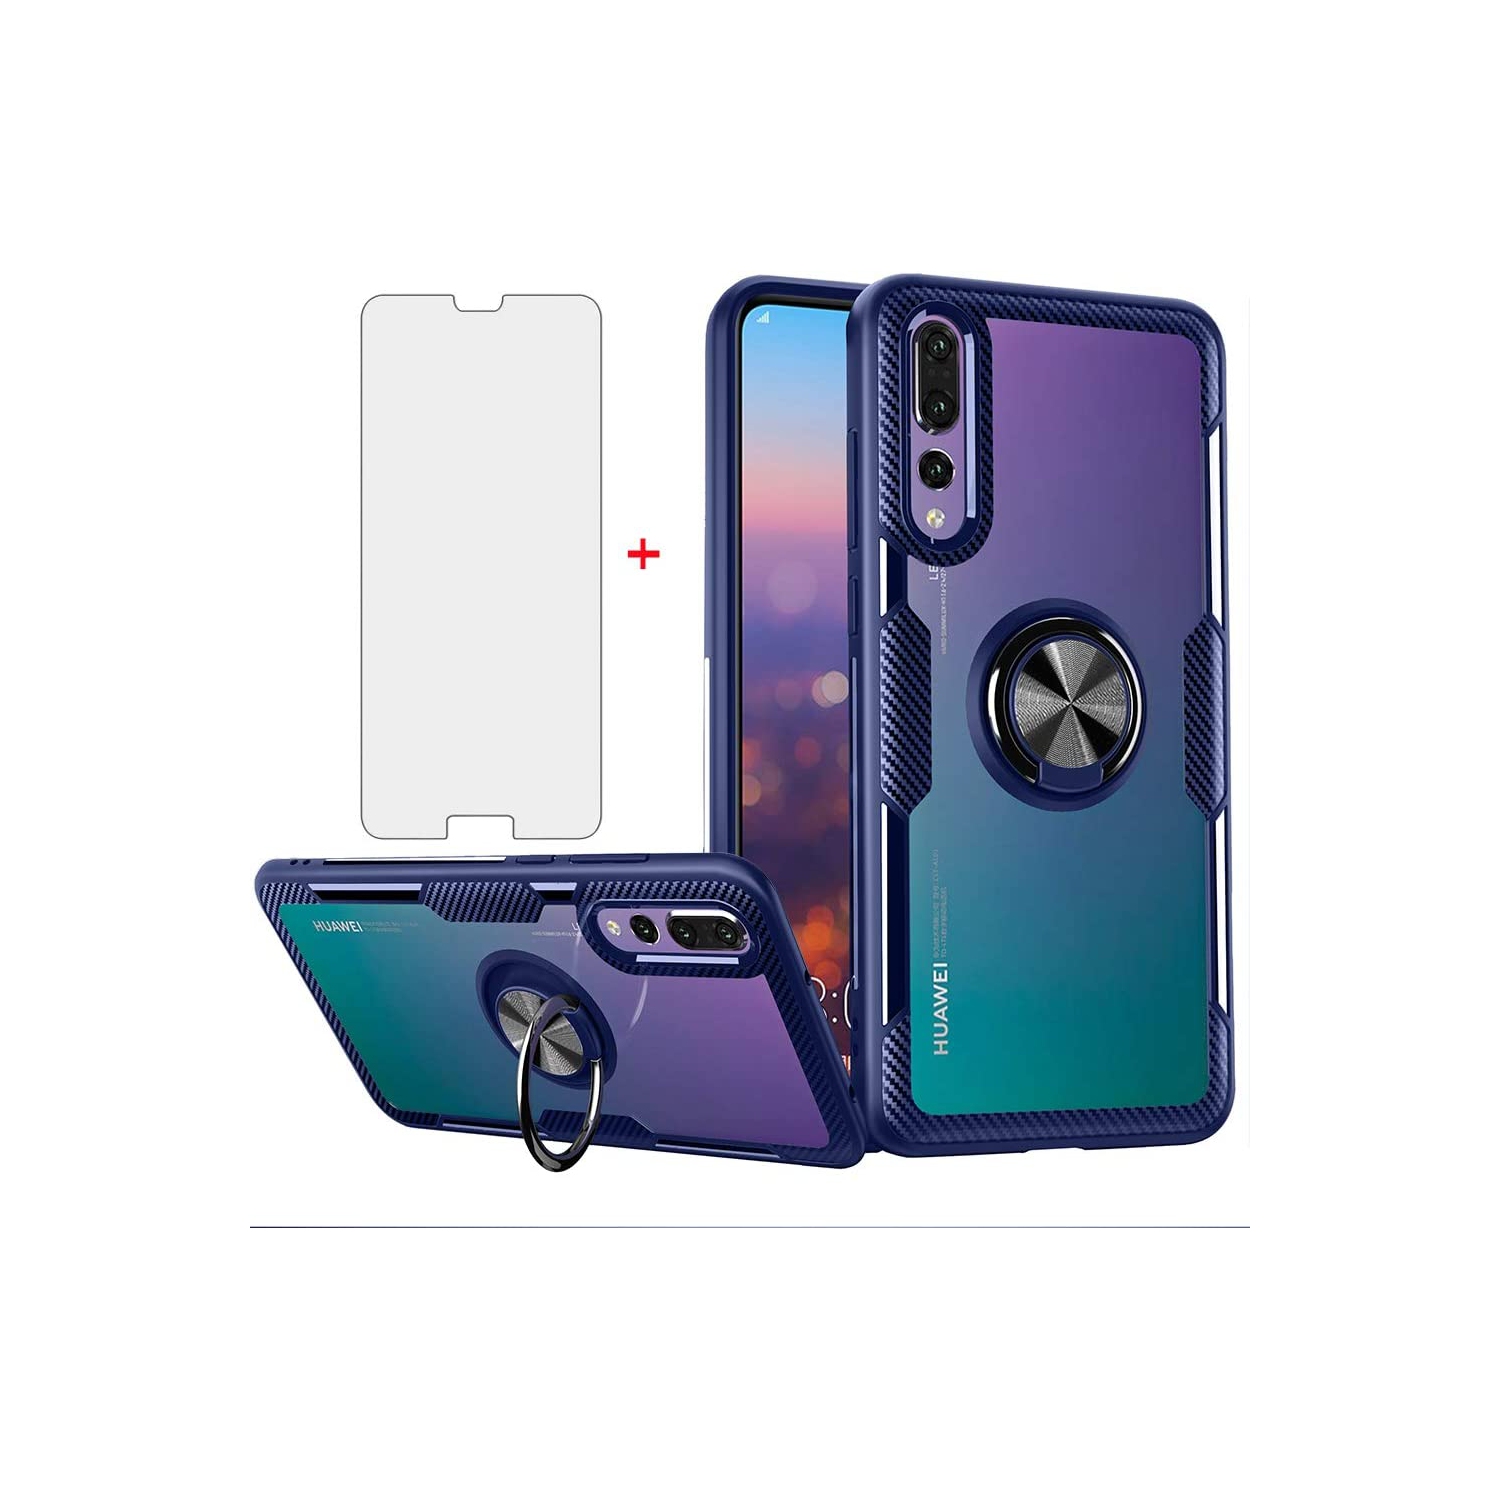 Phone Case for Huawei P20 Pro with Tempered Glass Screen Protector Clear Cover and Stand Ring Holder Slim Hard Cell